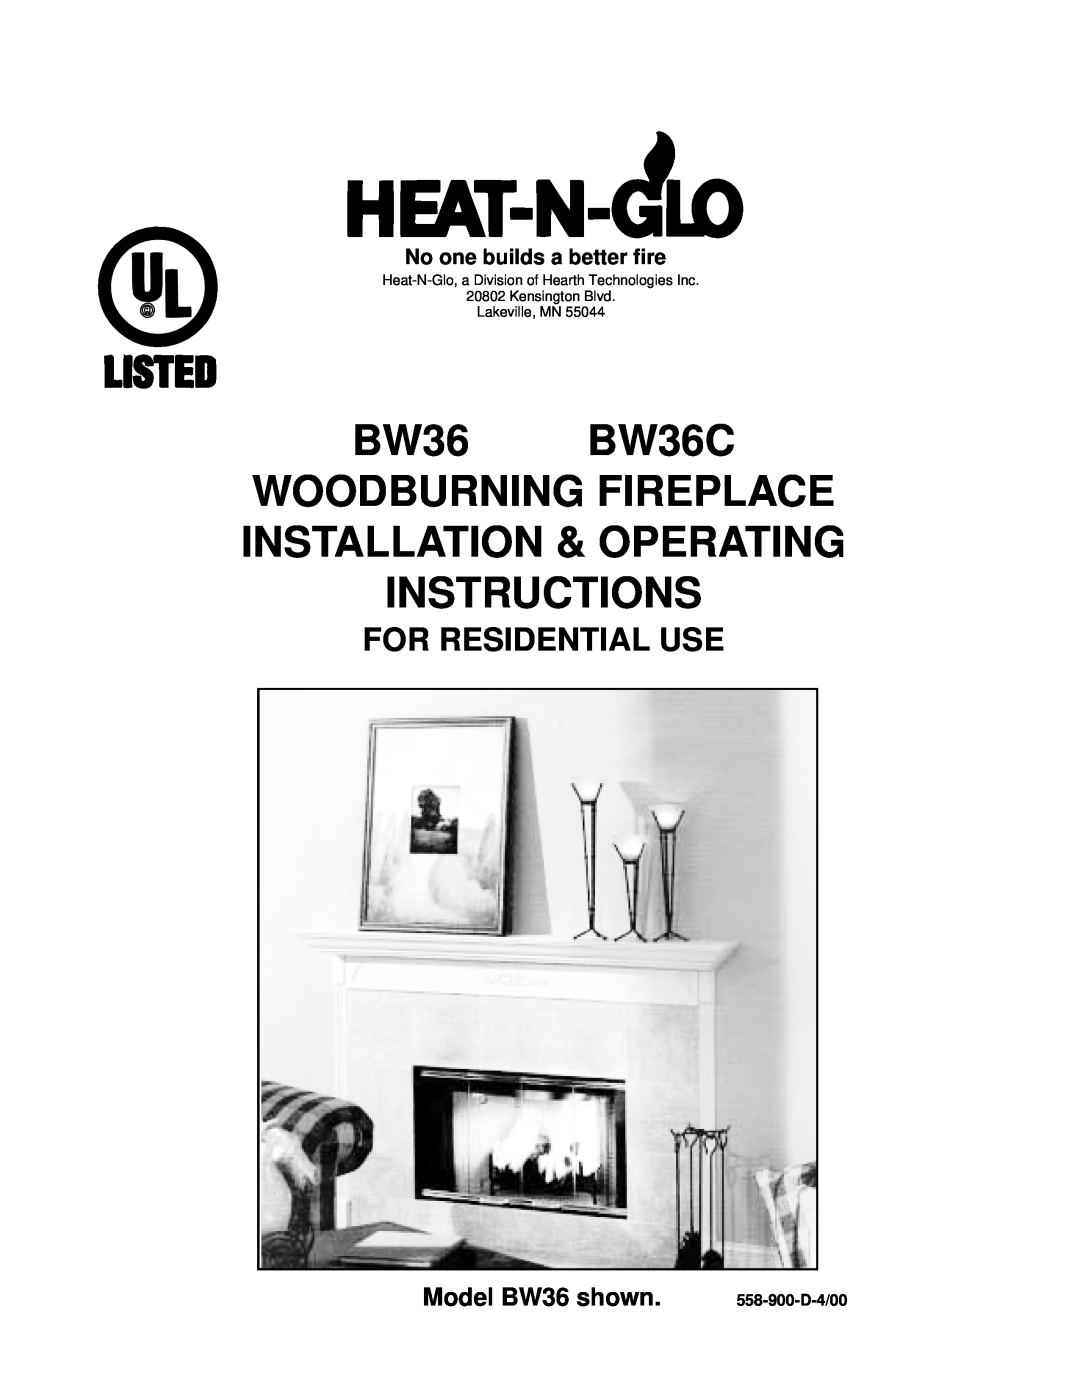 Heat & Glo LifeStyle operating instructions For Residential Use, Model BW36 shown, No one builds a better fire 